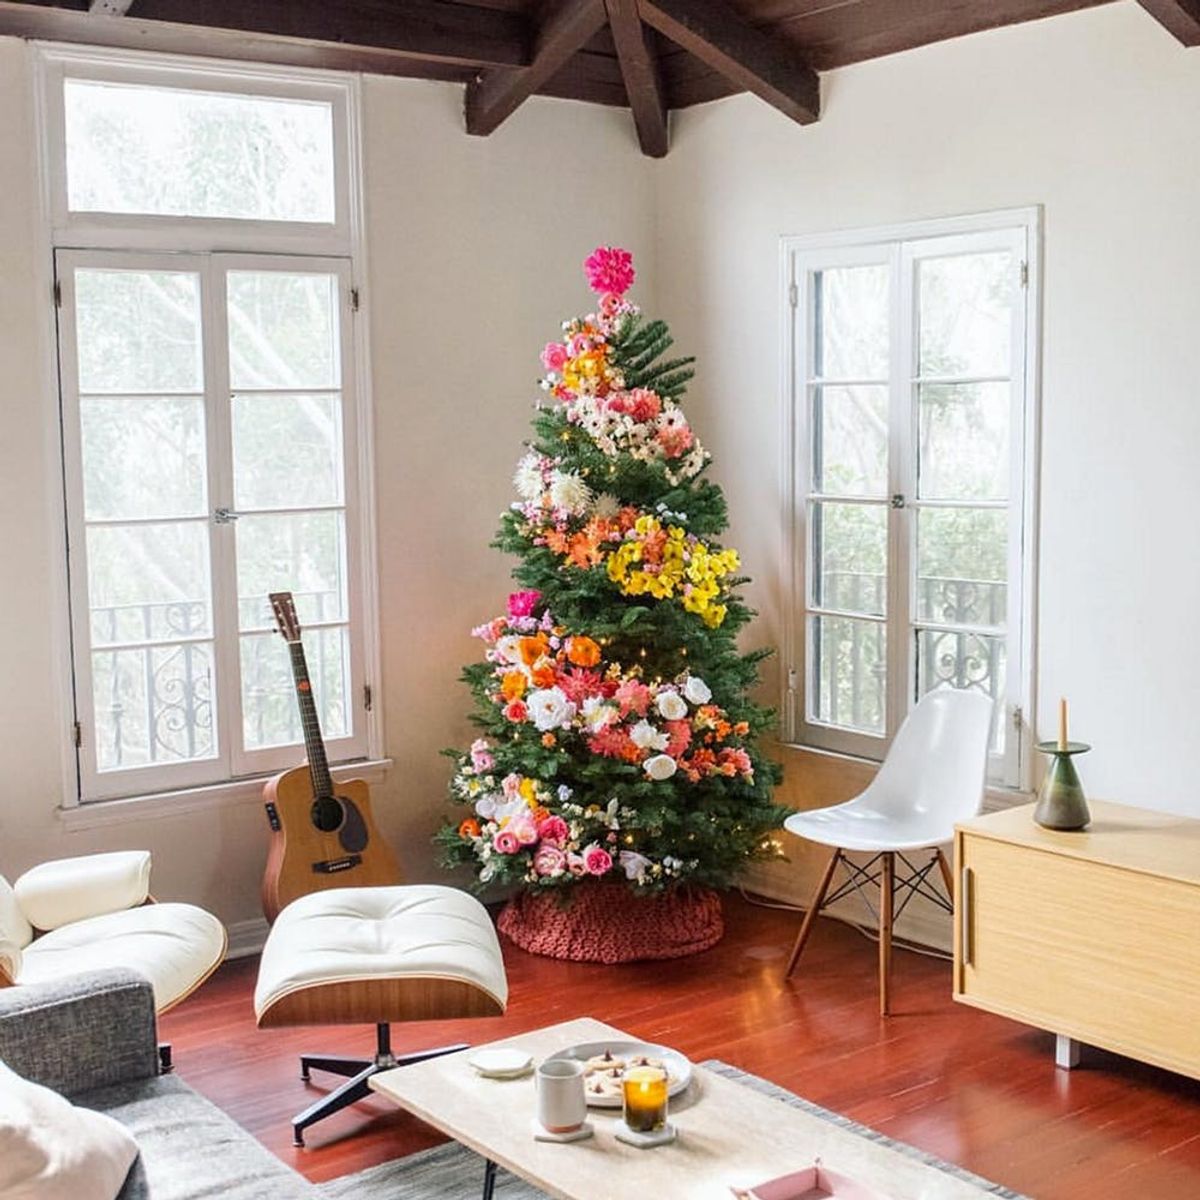 This Is the Trending Christmas Tree Decor You Haven’t Thought of Yet